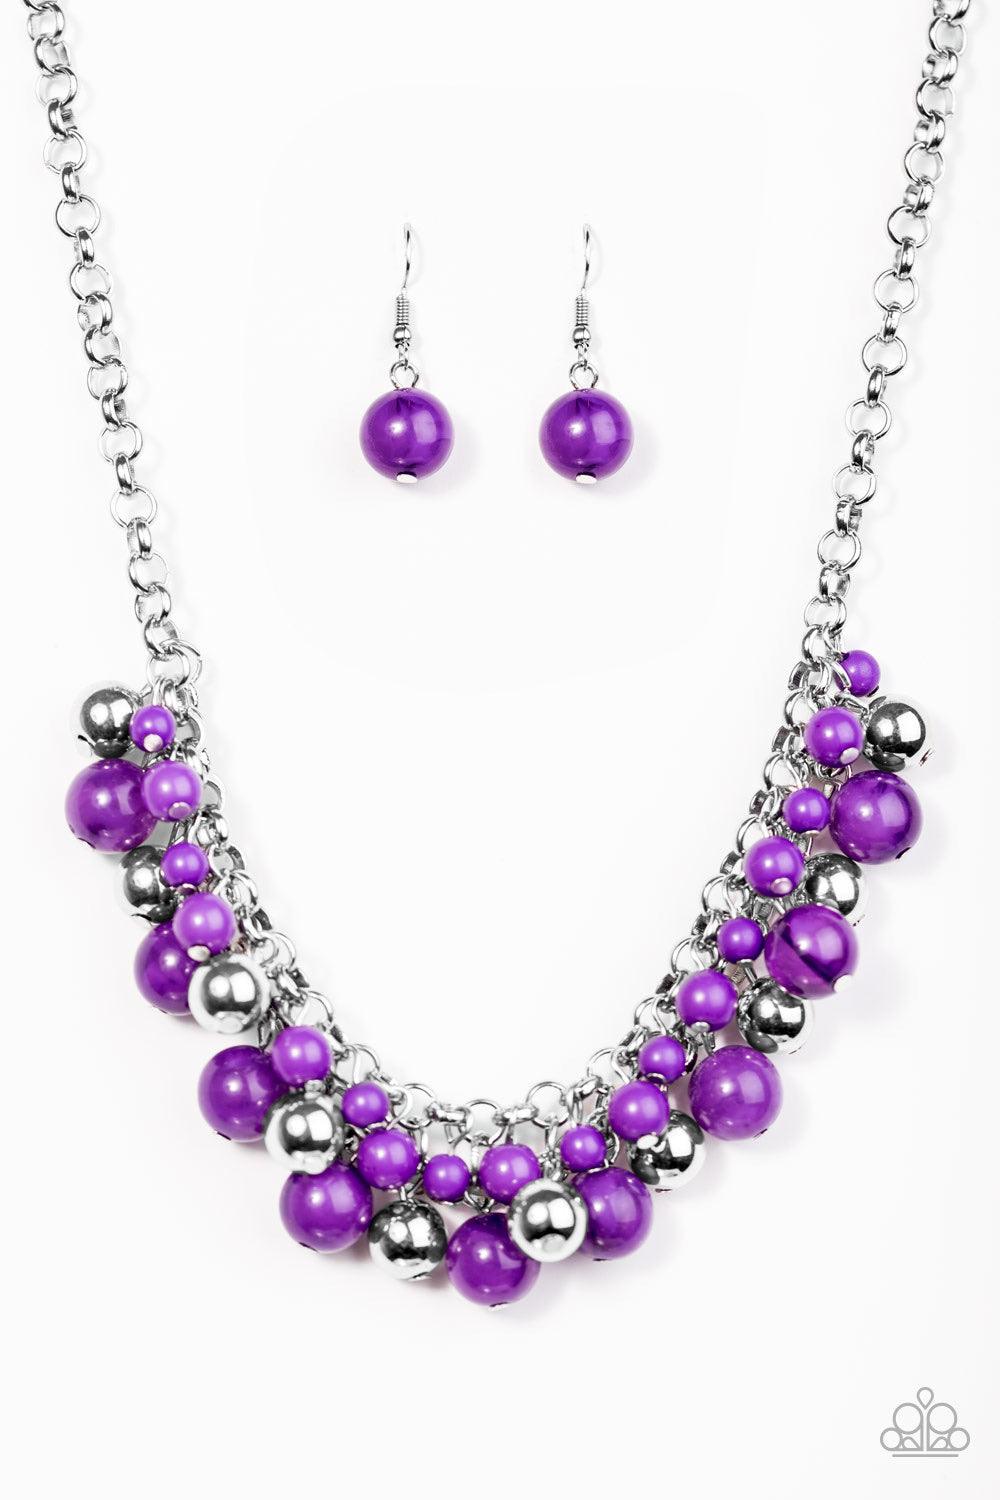 Paparazzi Accessories For The Love of Fashion - Purple Opaque purple beads trickle from the bottom of a bold silver chain. Infused with classic silver beading, the colorful fringe joins below the collar in a timelessly colorful fashion. Features an adjust